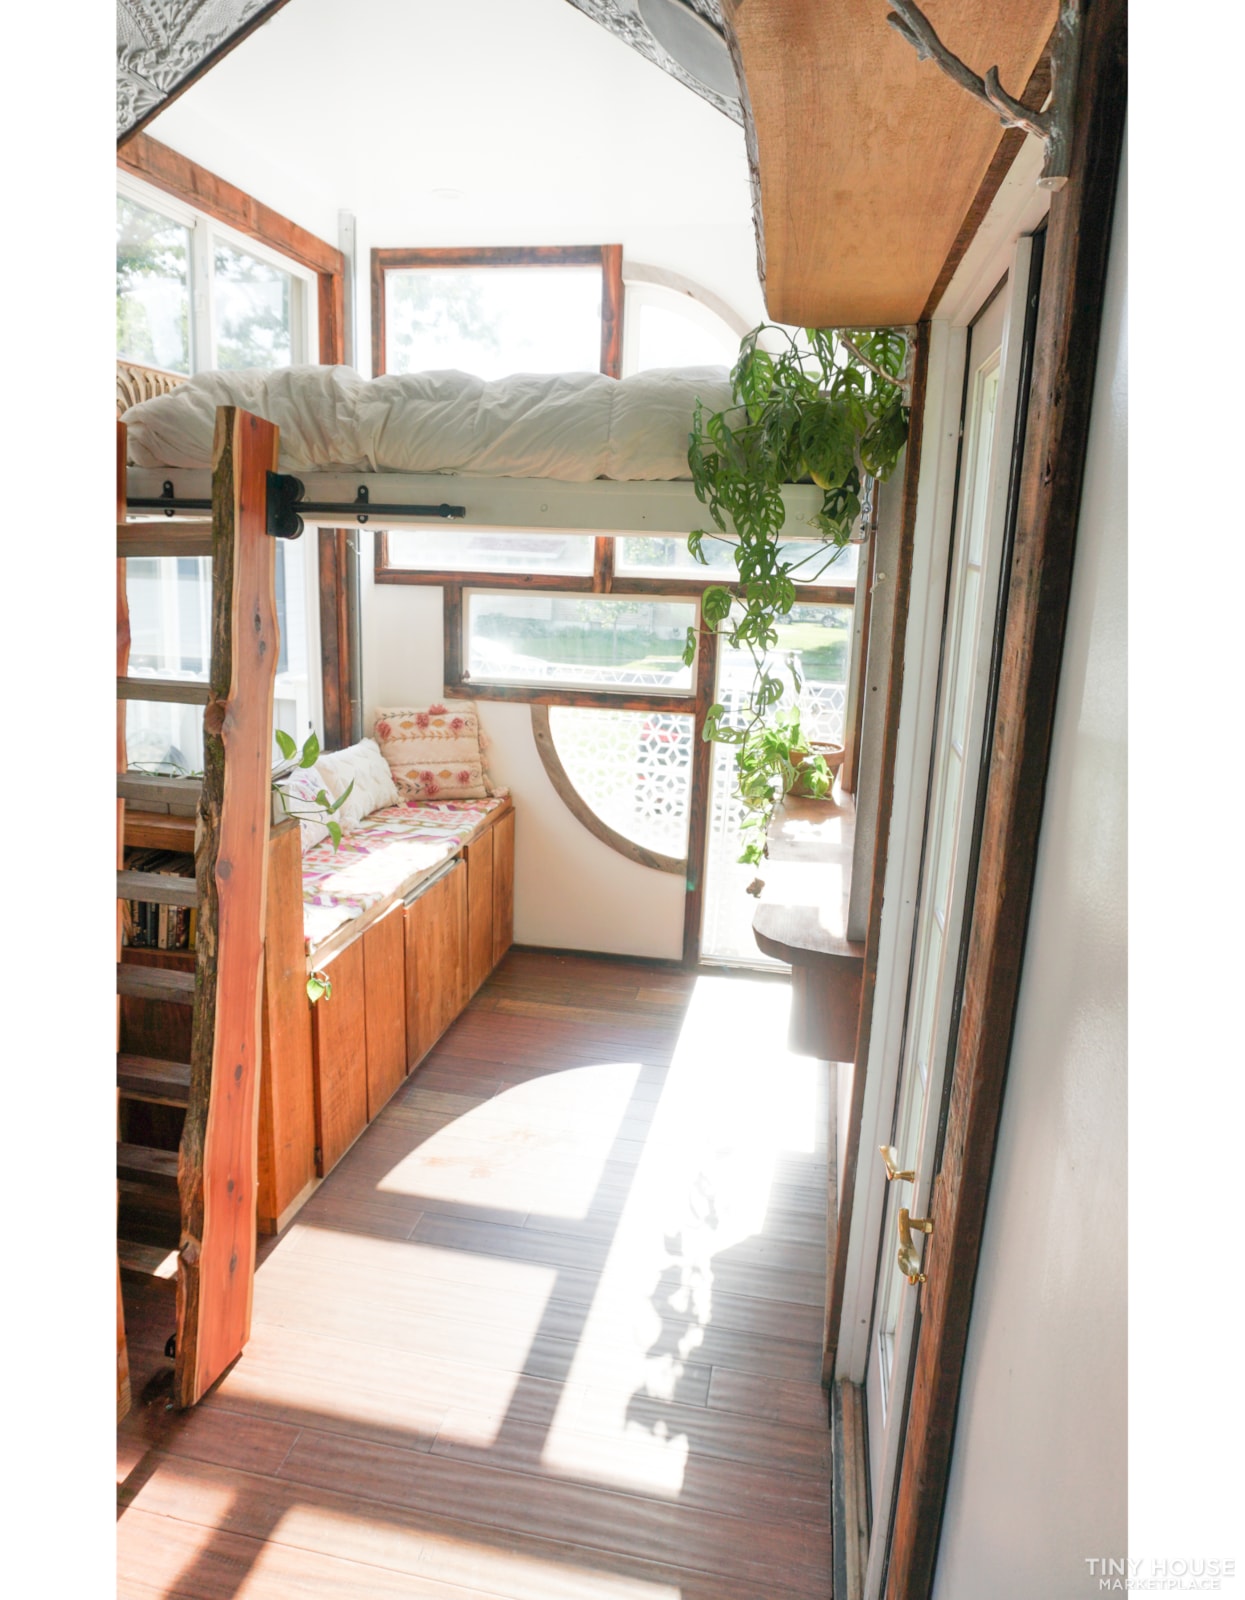 20+ Incredible Luxury Modern Tiny Homes With Huge Windows and Decks